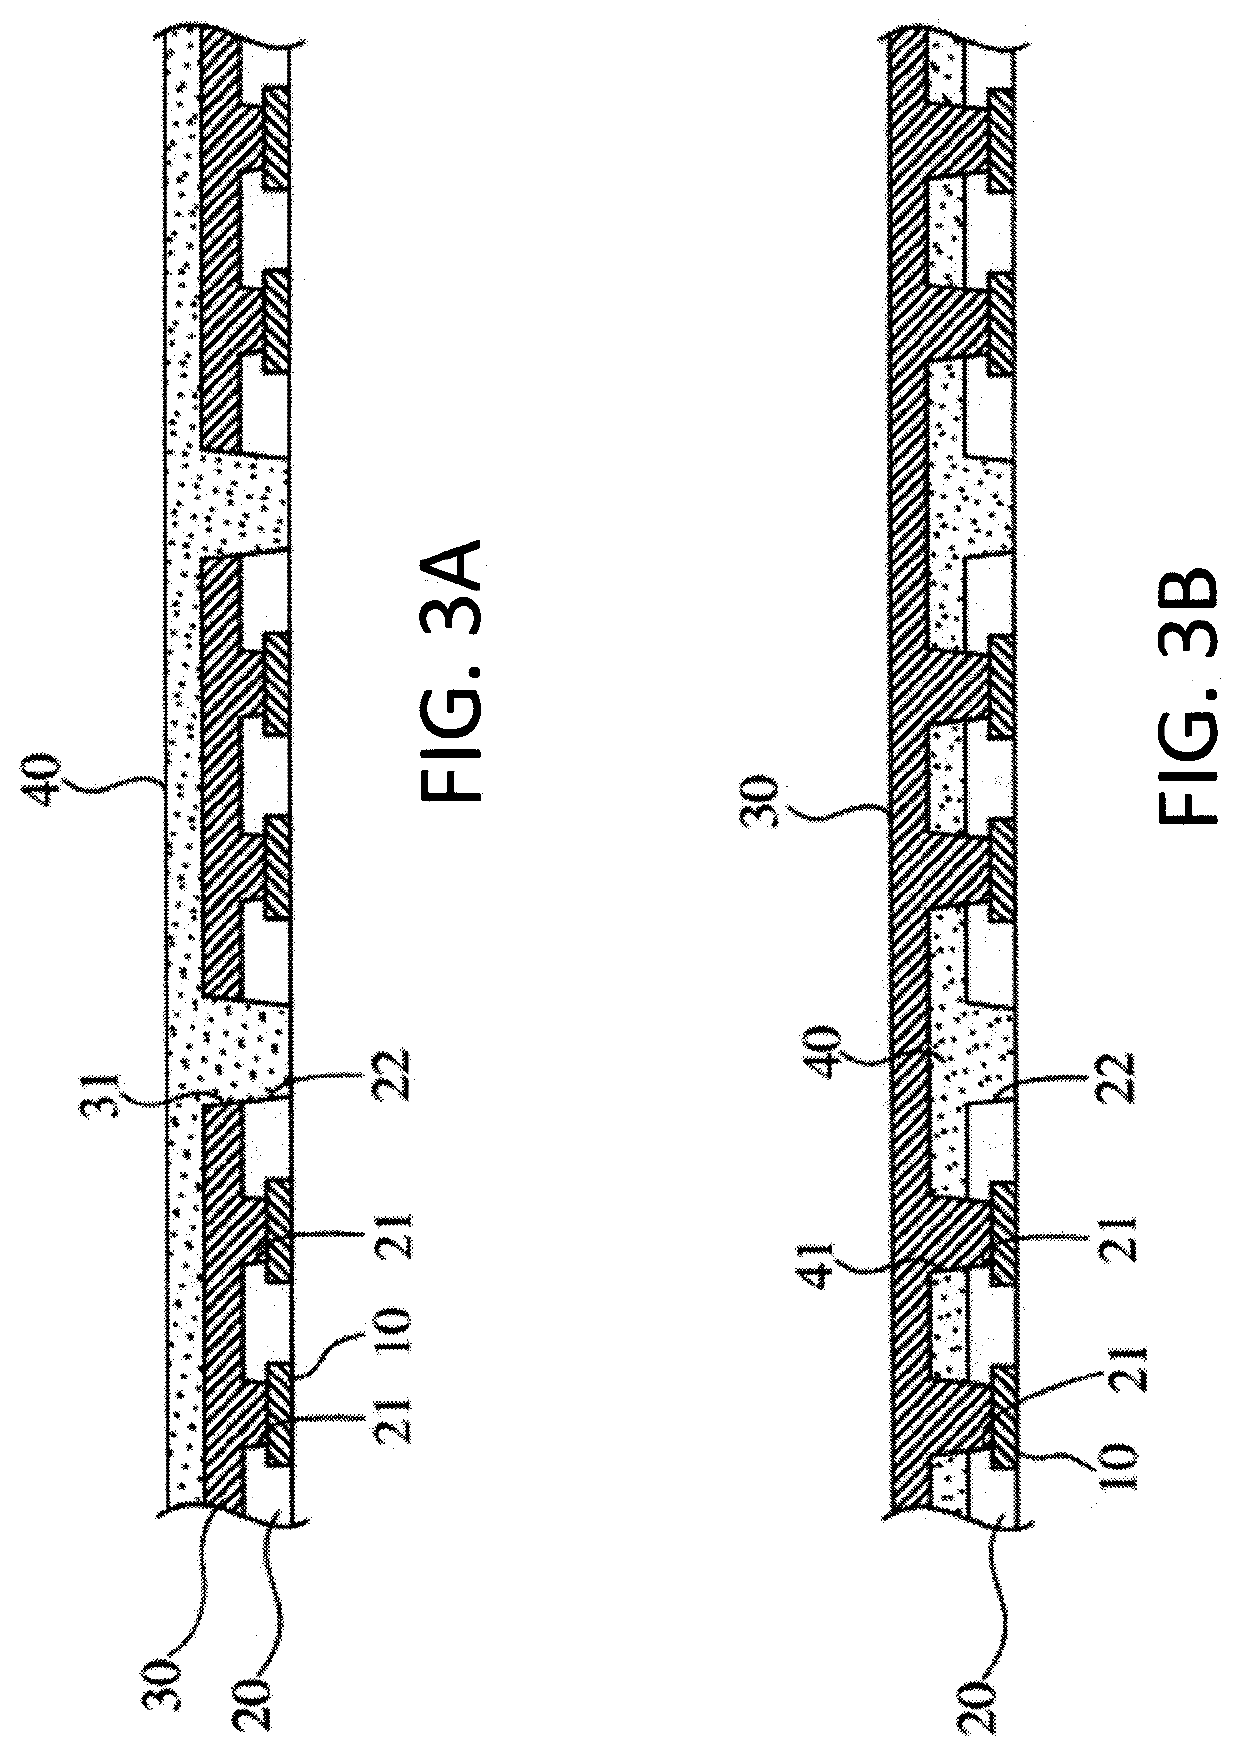 Flexible display panel with bending-resistant signal lines